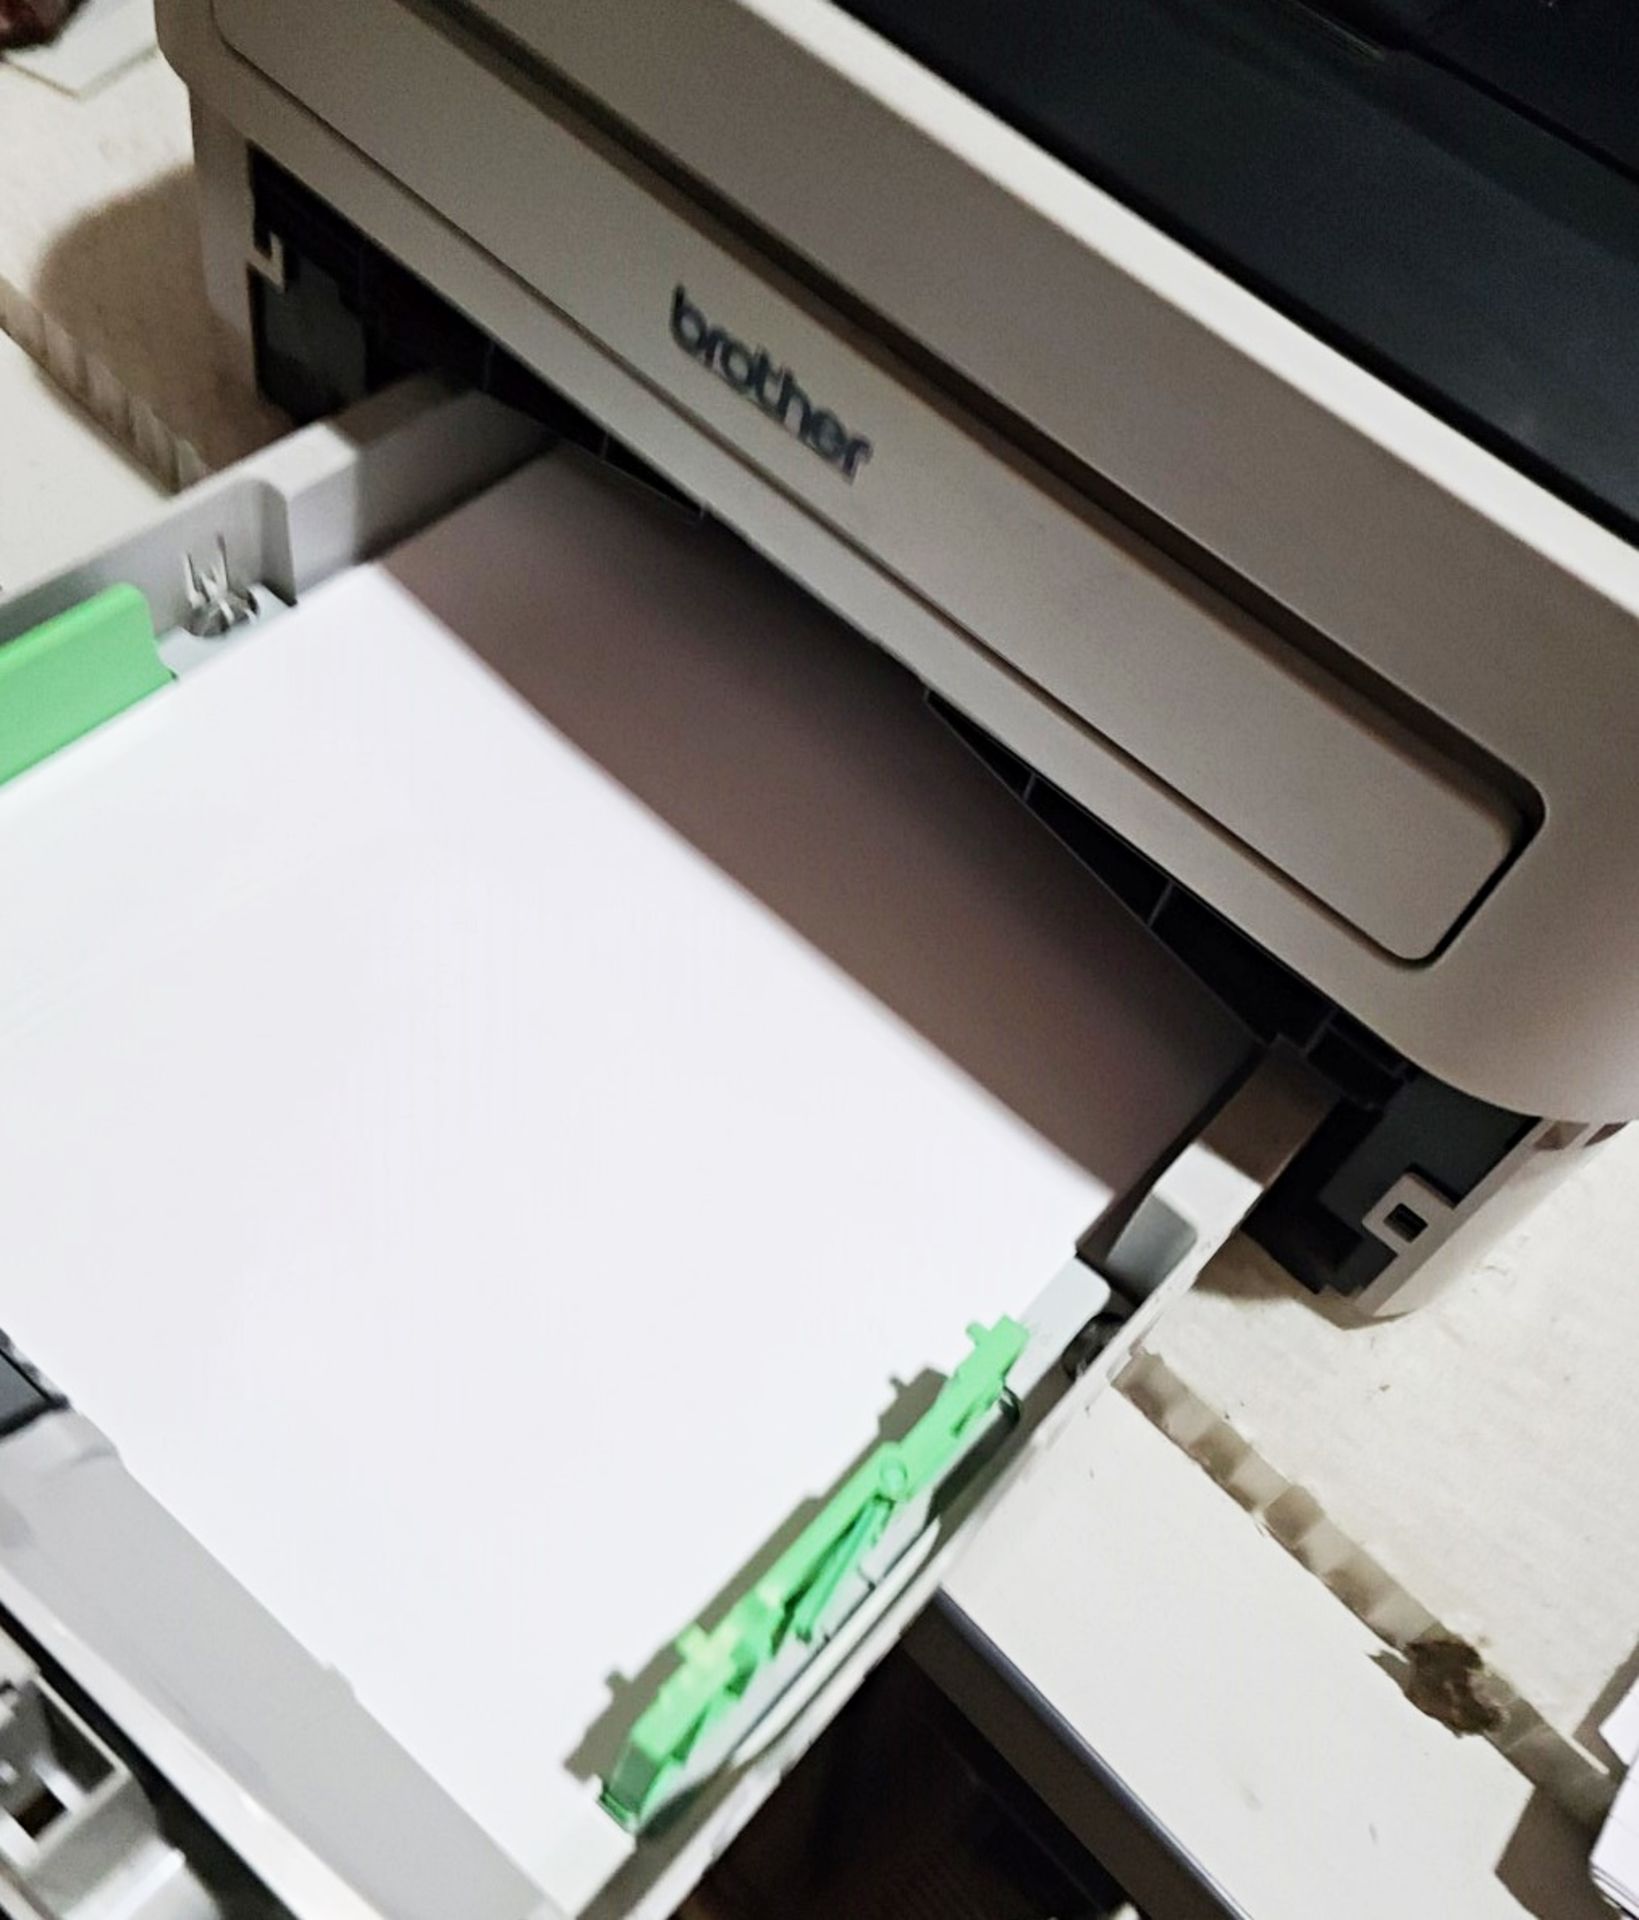 1 x Brother Printer MFC -9140CDN A4 Colour Multifunction Printer/Scanner/Copy/Fax Machine - Image 3 of 7